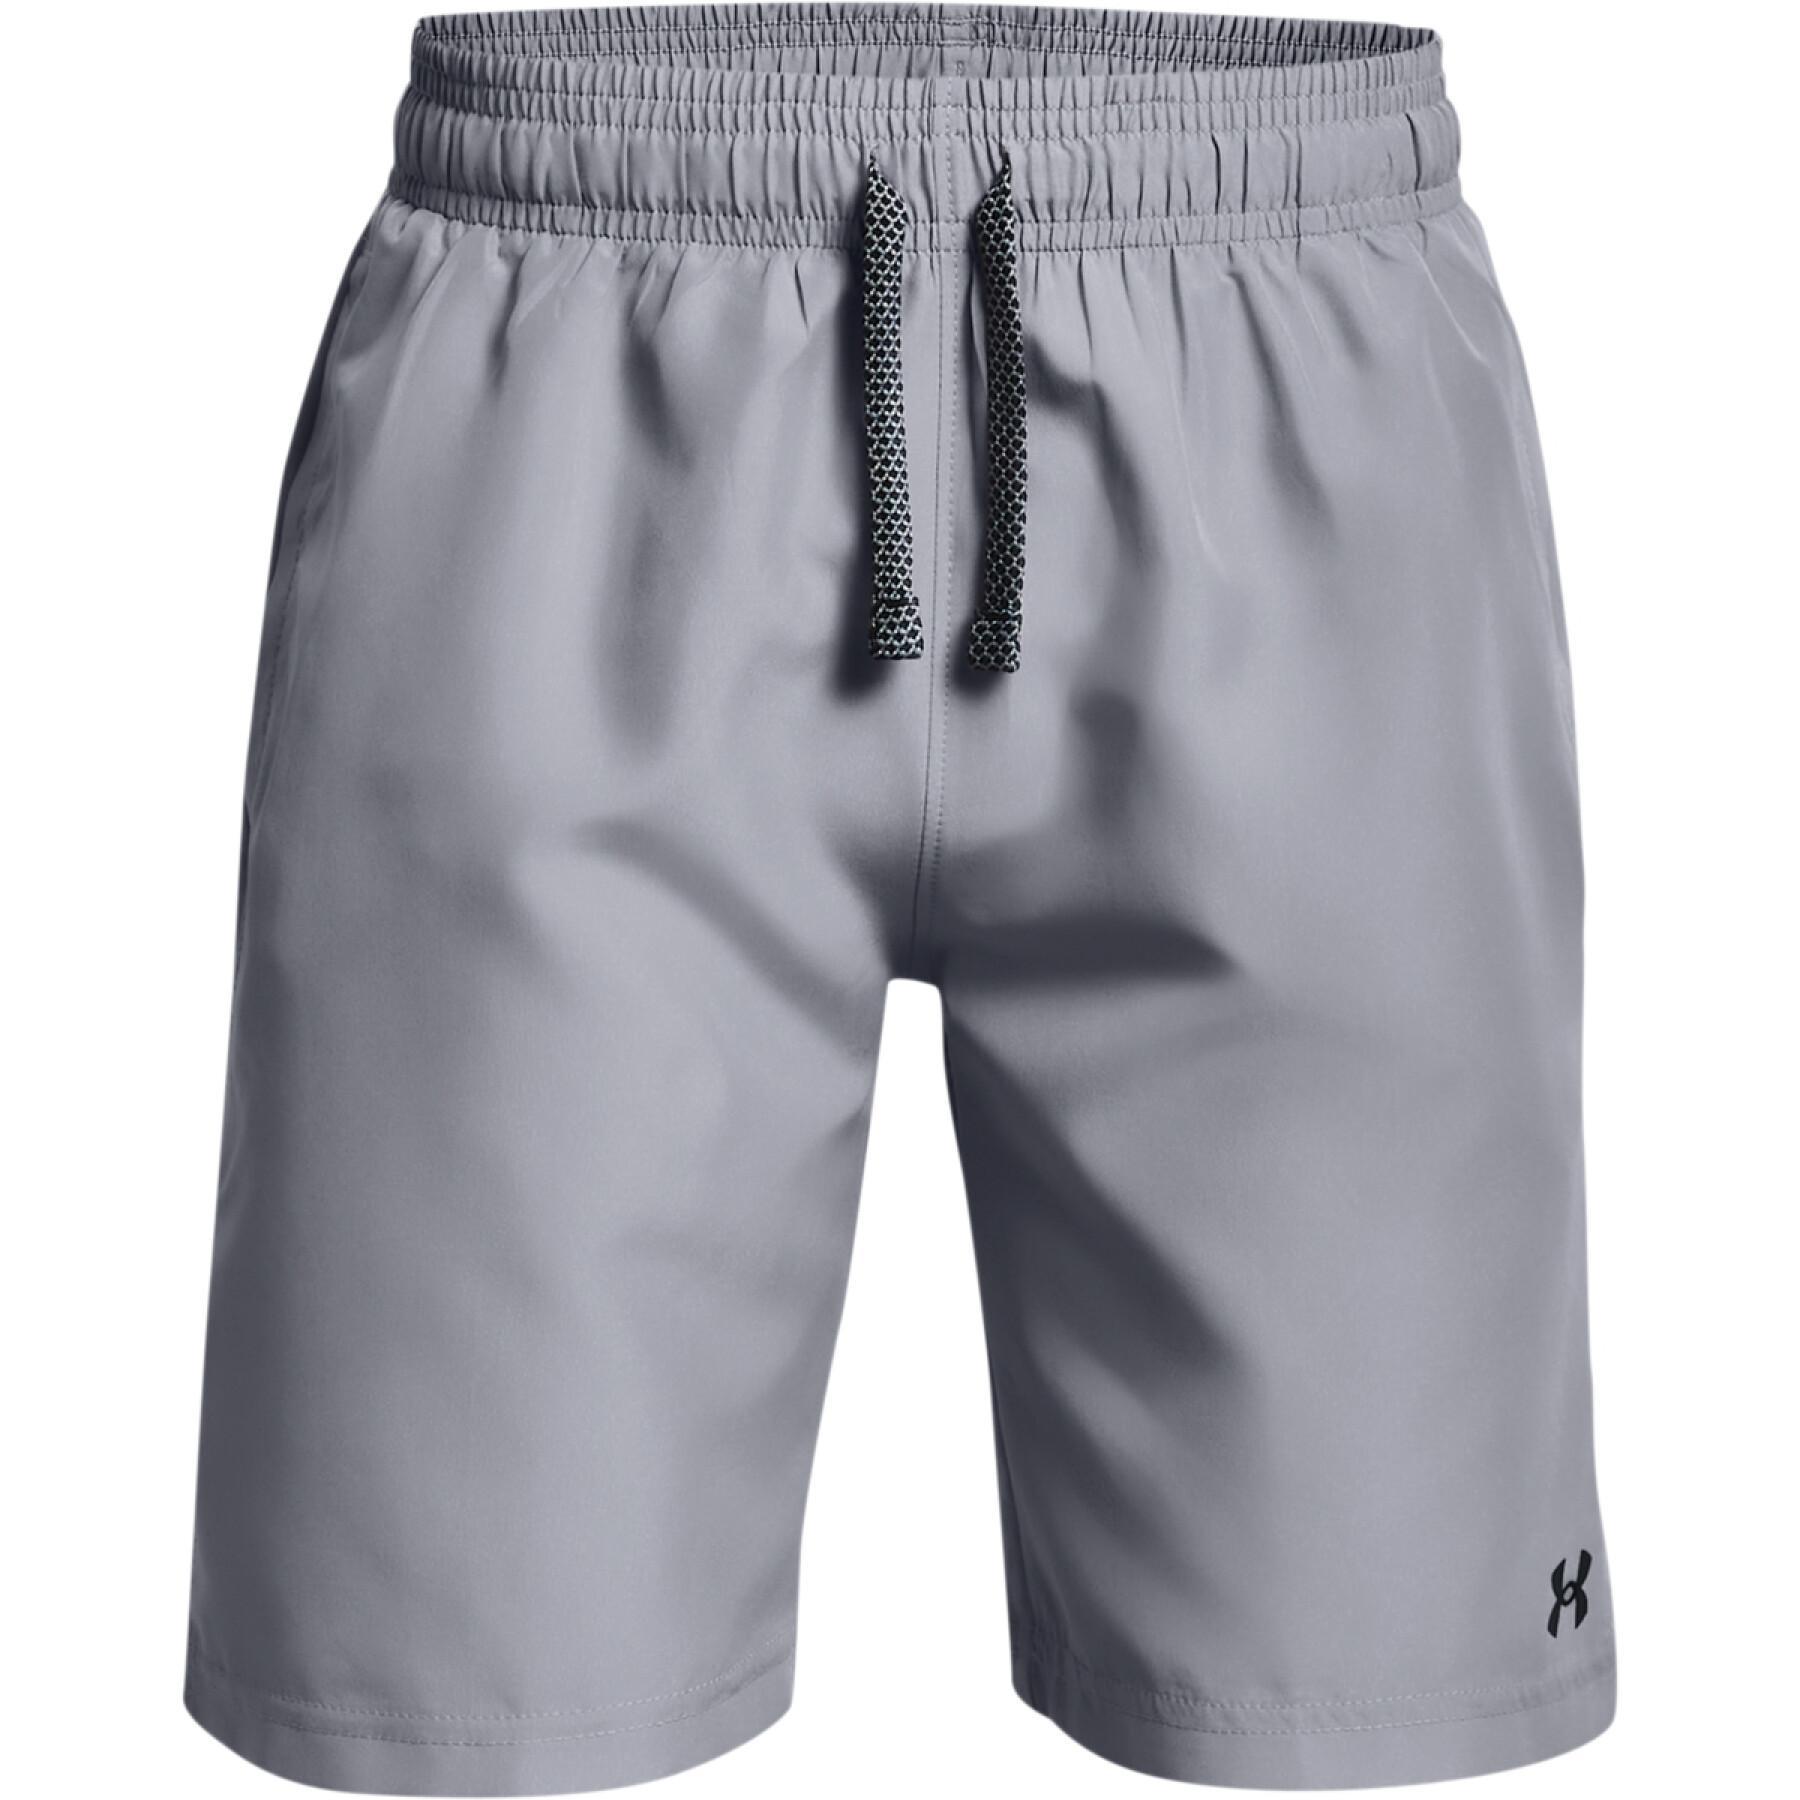 Kindershorts Under Armour Woven